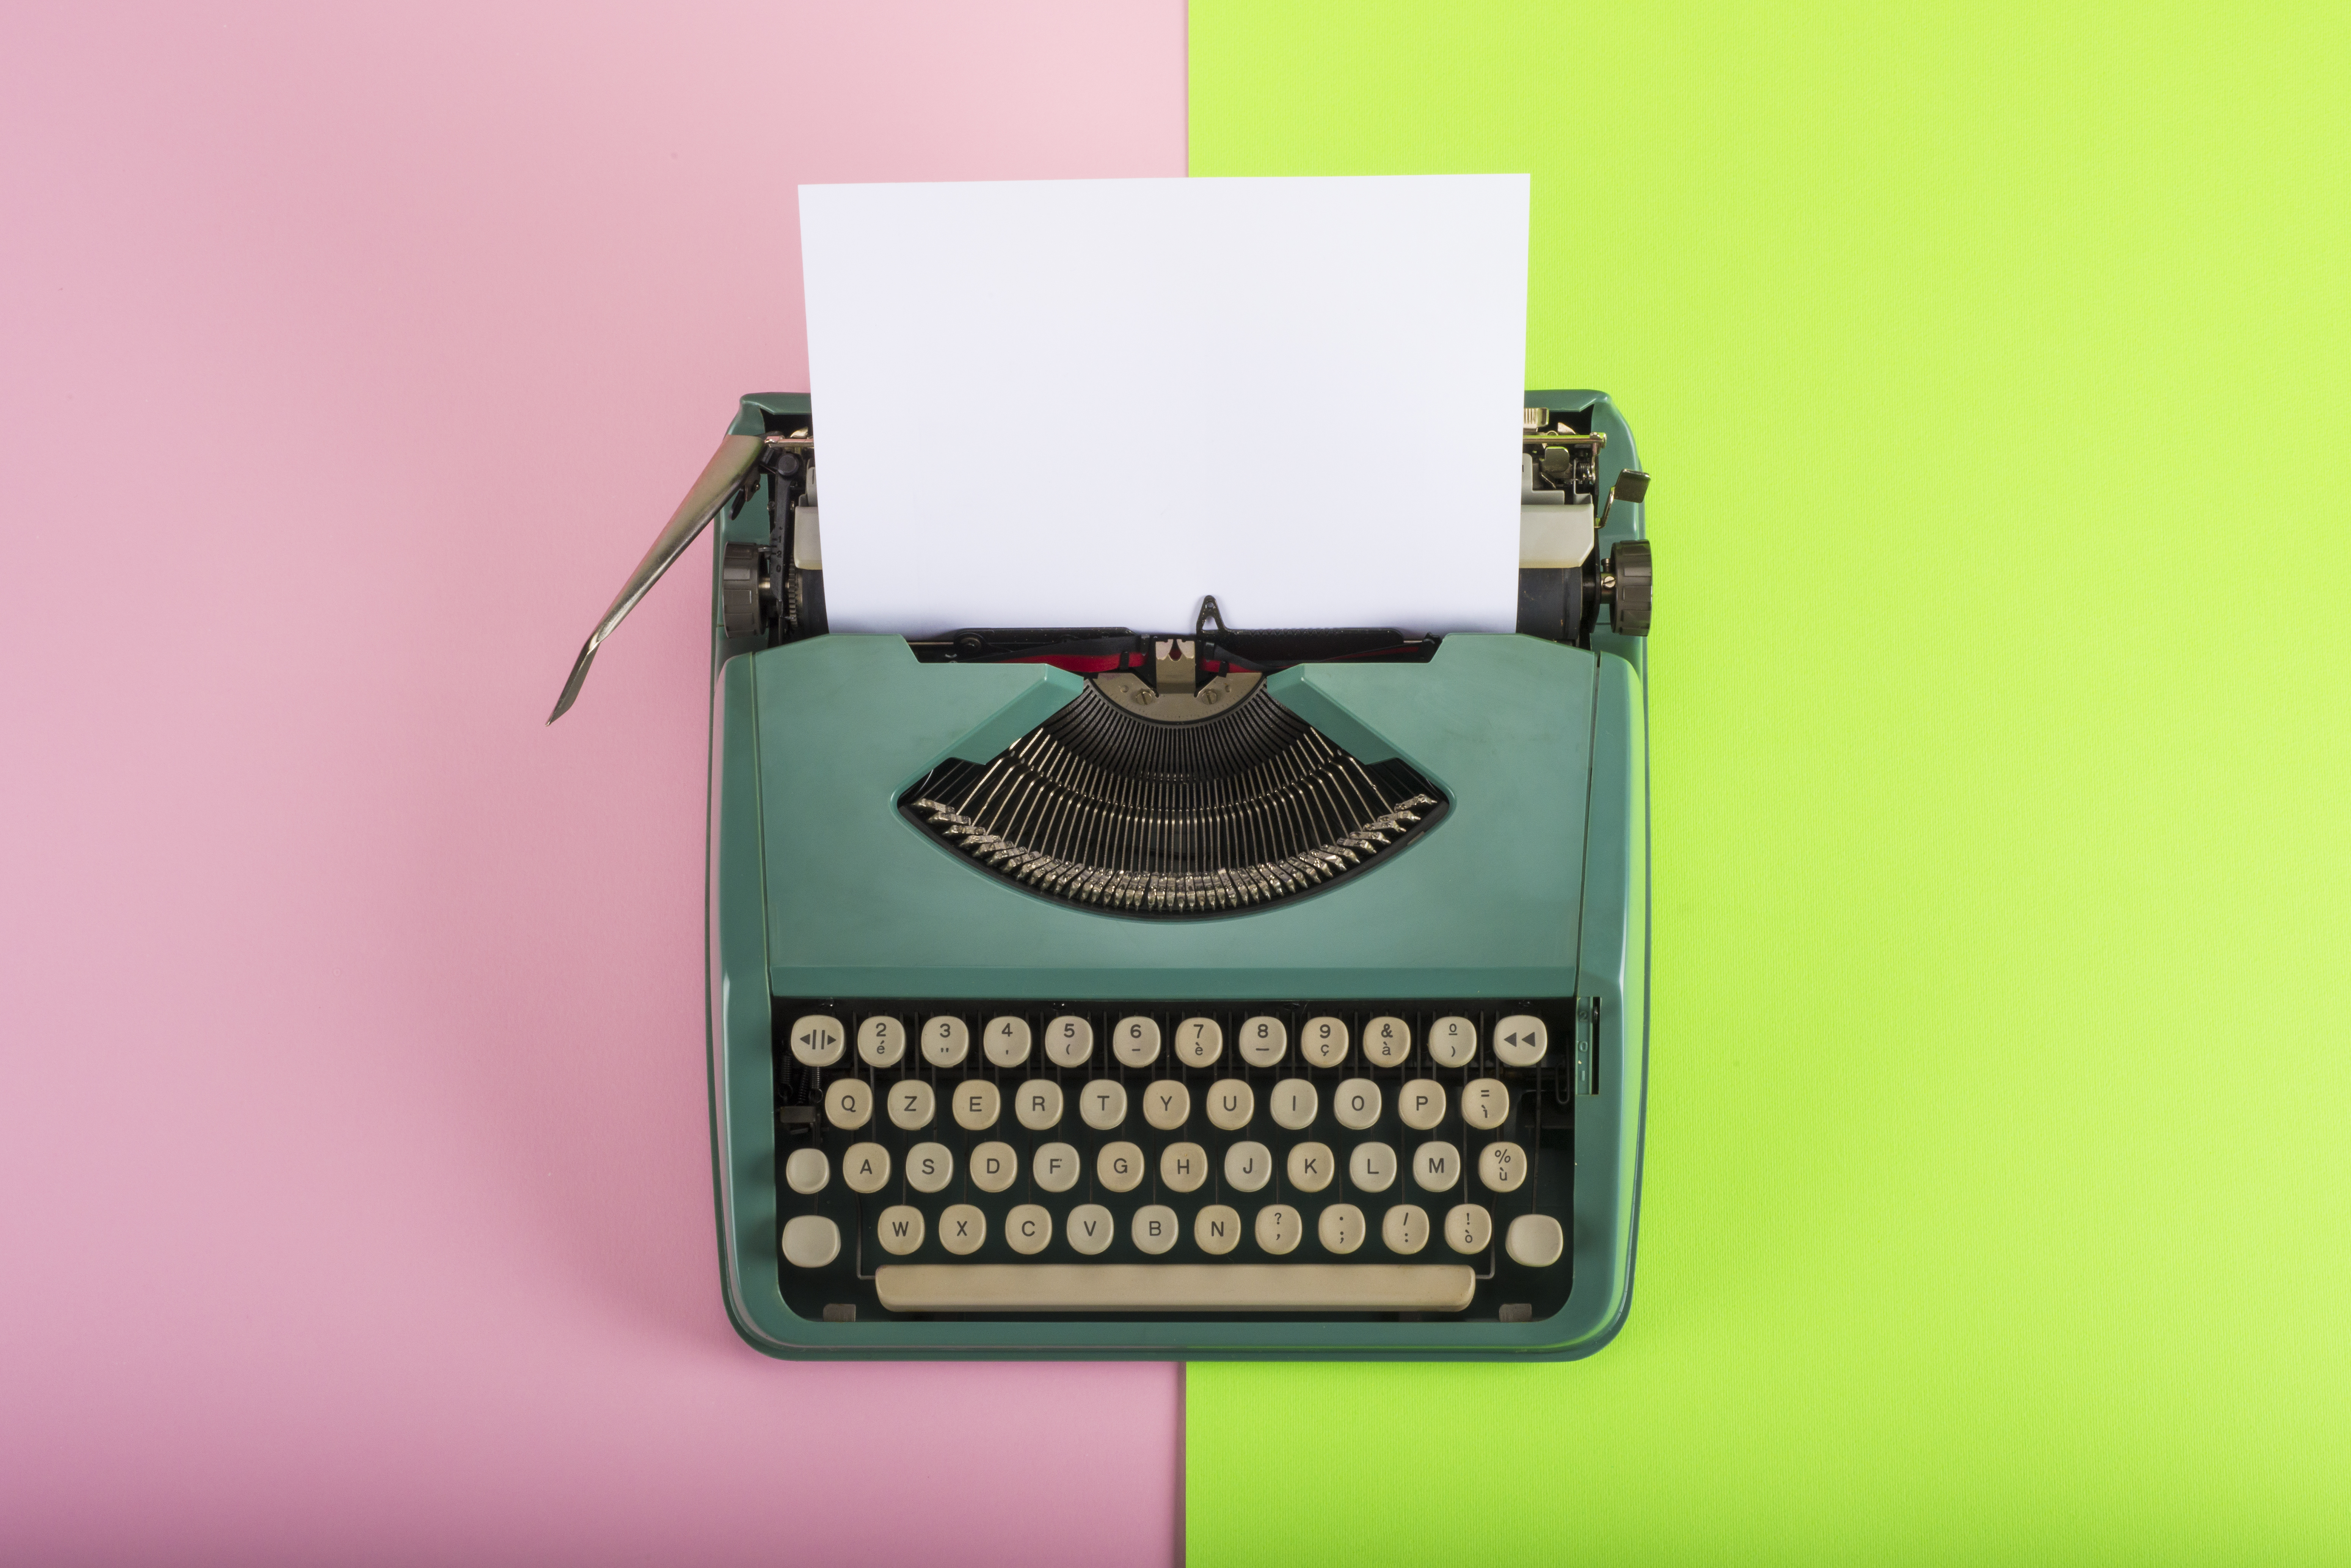 Vintage typewriter with paper sheet on pink and green background